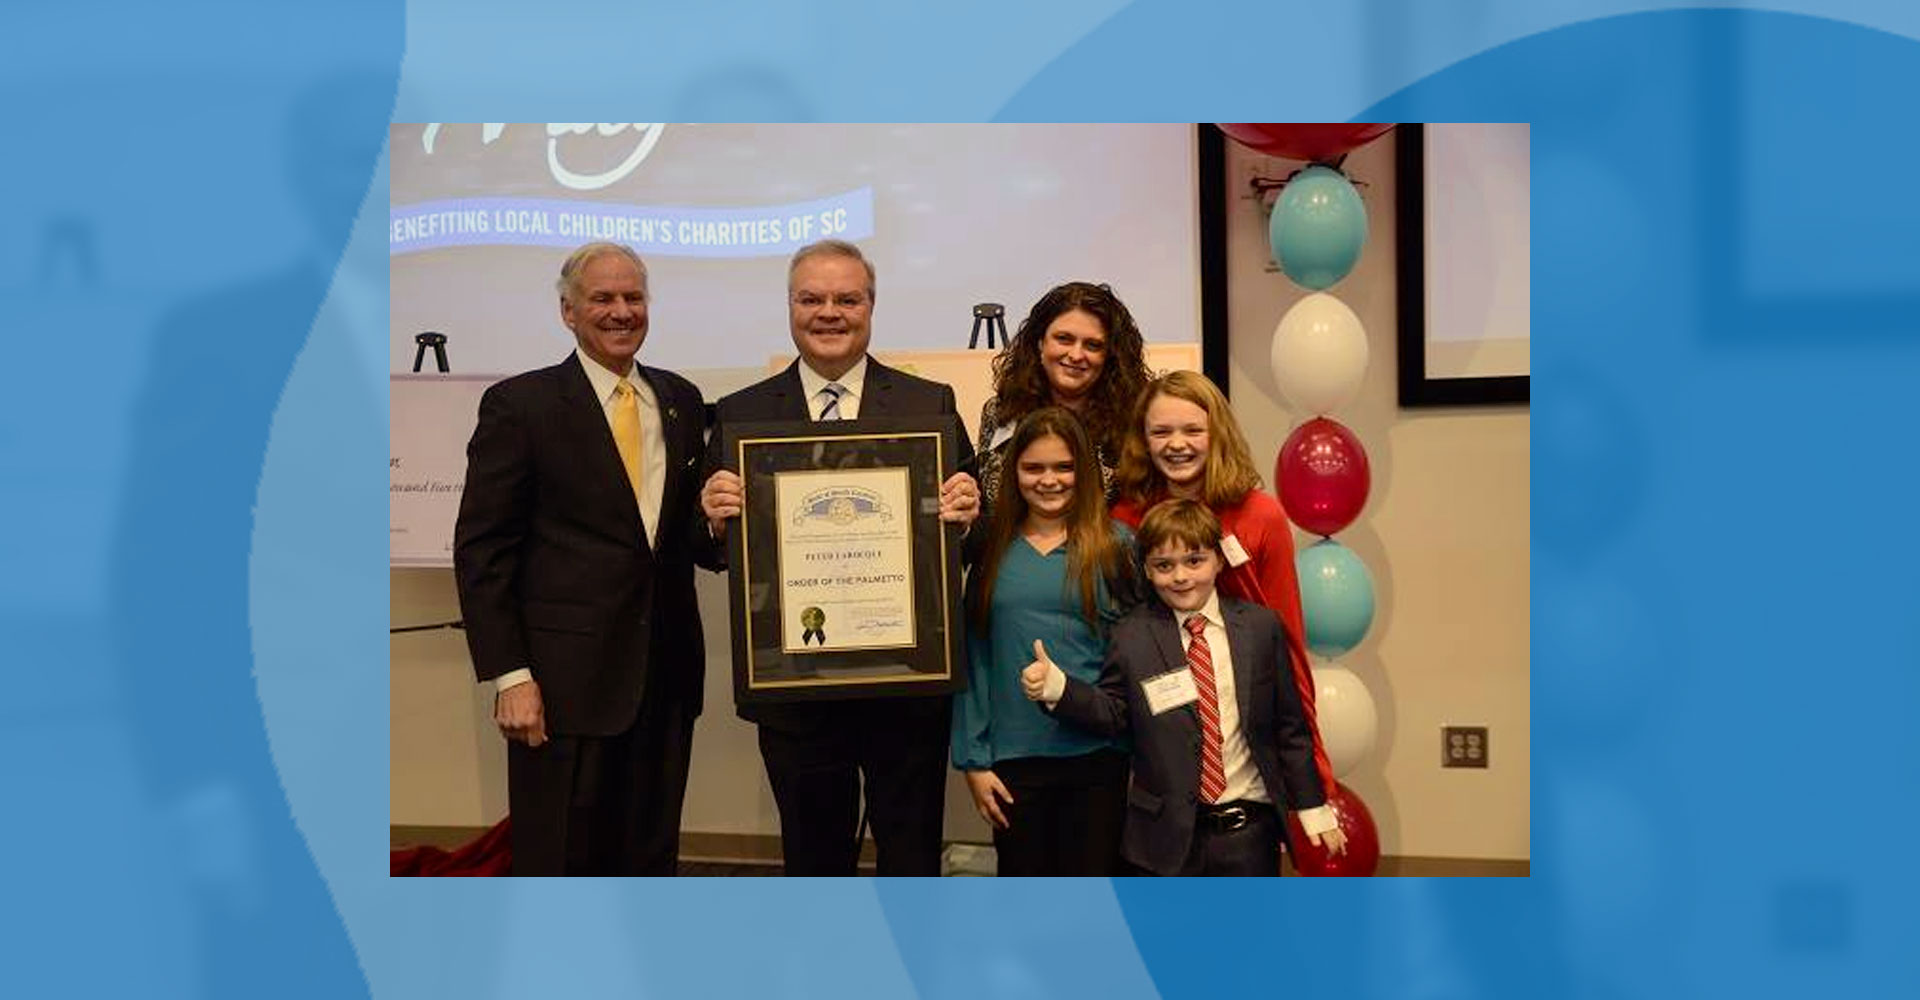 Seventh Annual TD SYNNEX <em>Share the Magic</em> Raises Record-breaking $1.8 Million for Upstate Children’s Charities